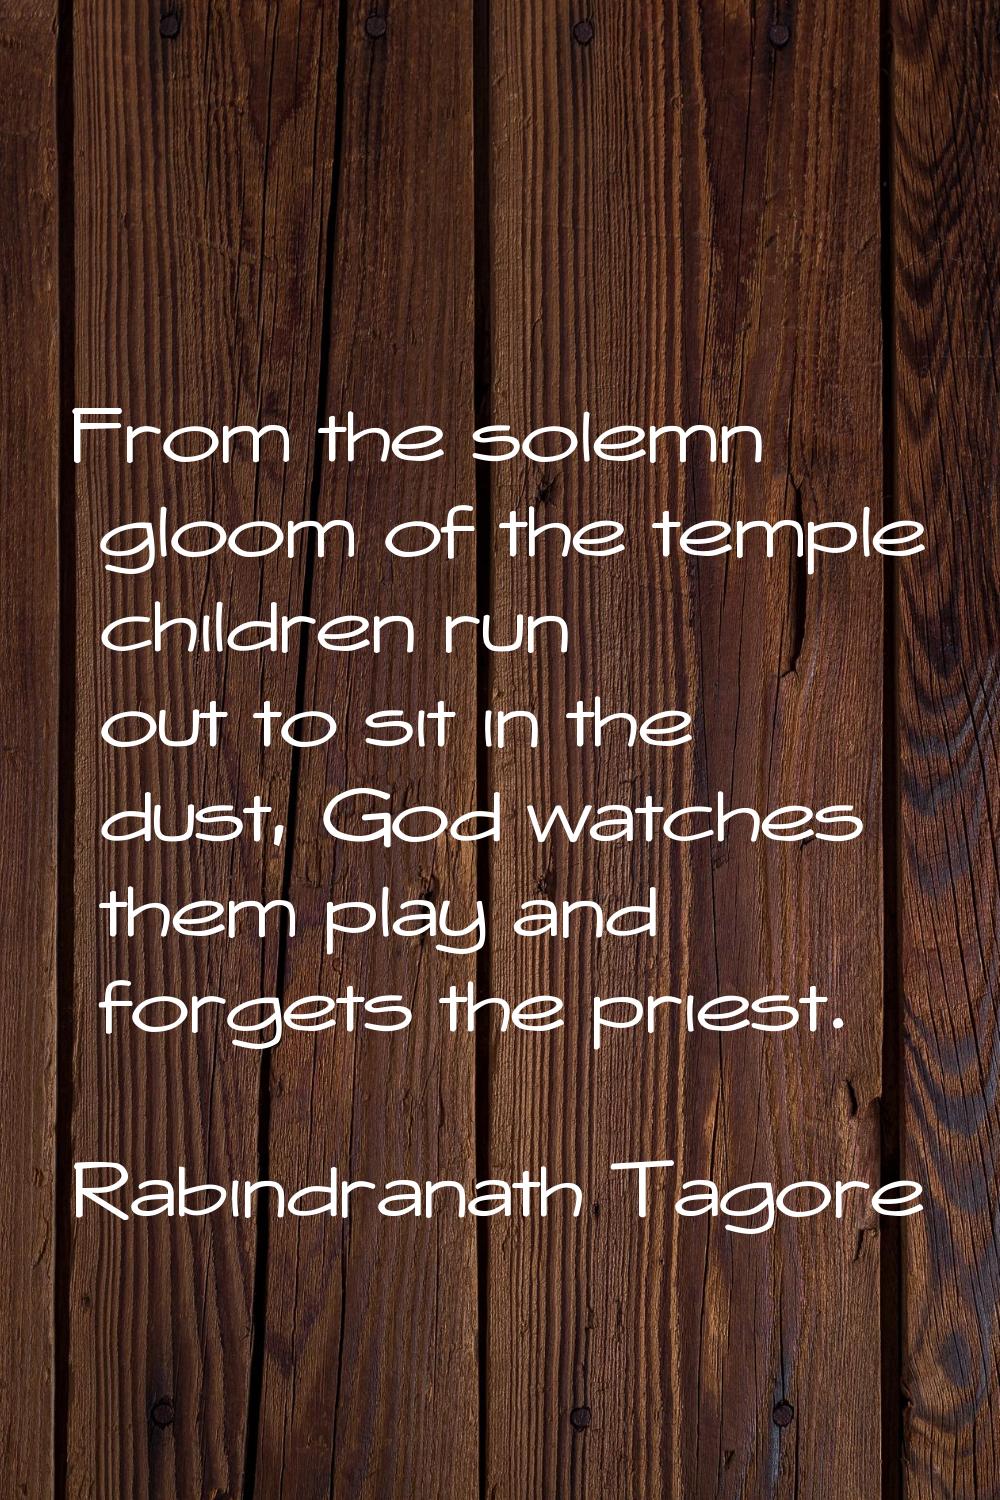 From the solemn gloom of the temple children run out to sit in the dust, God watches them play and 